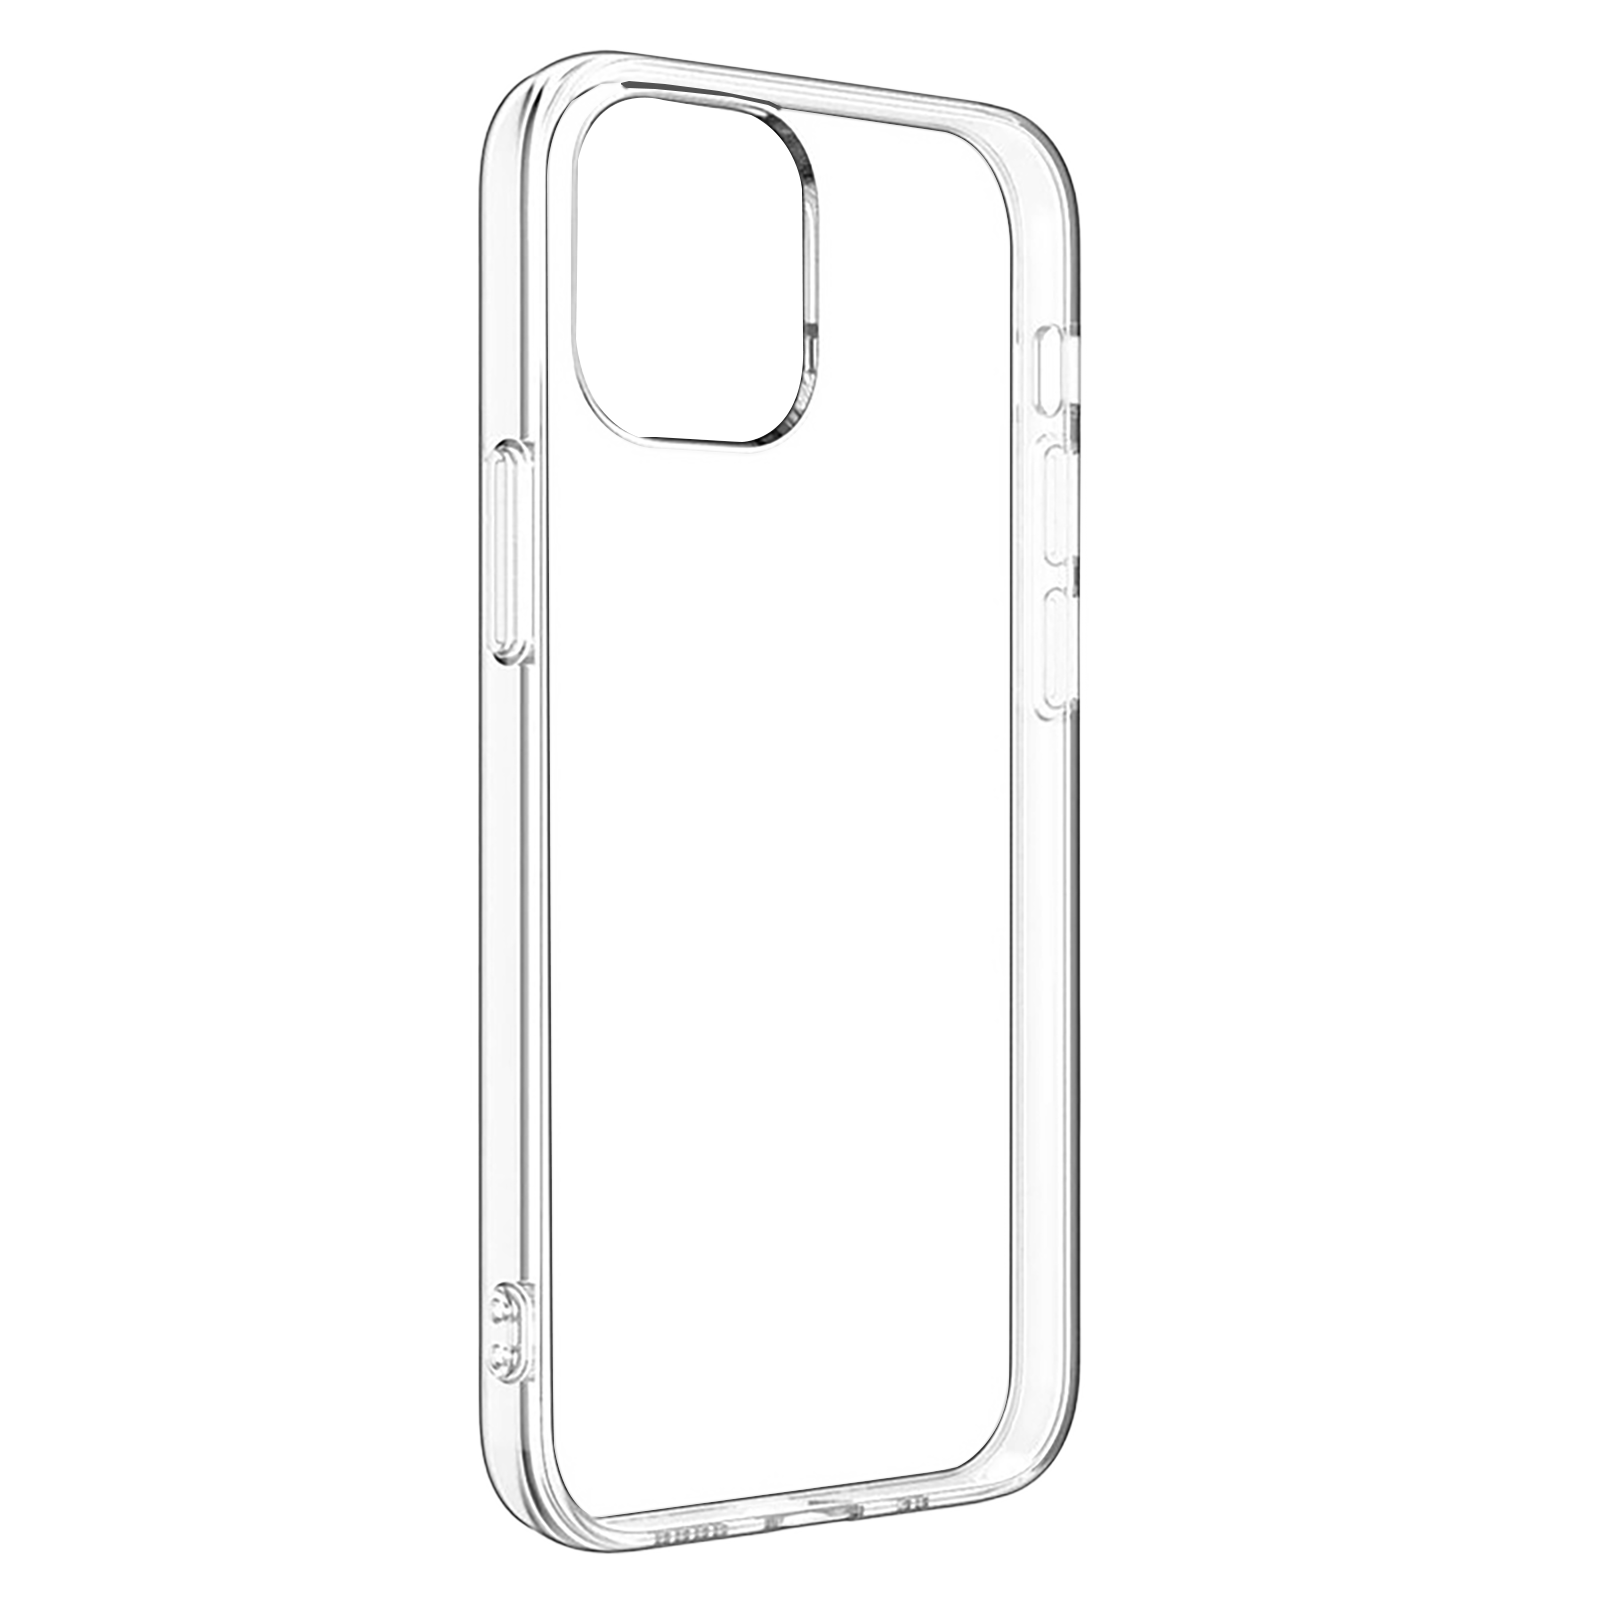 Dr. Vaku Glassy Polycarbonate Back Cover for Apple iPhone 13 Pro Max (Scratch Resistant, Clear)